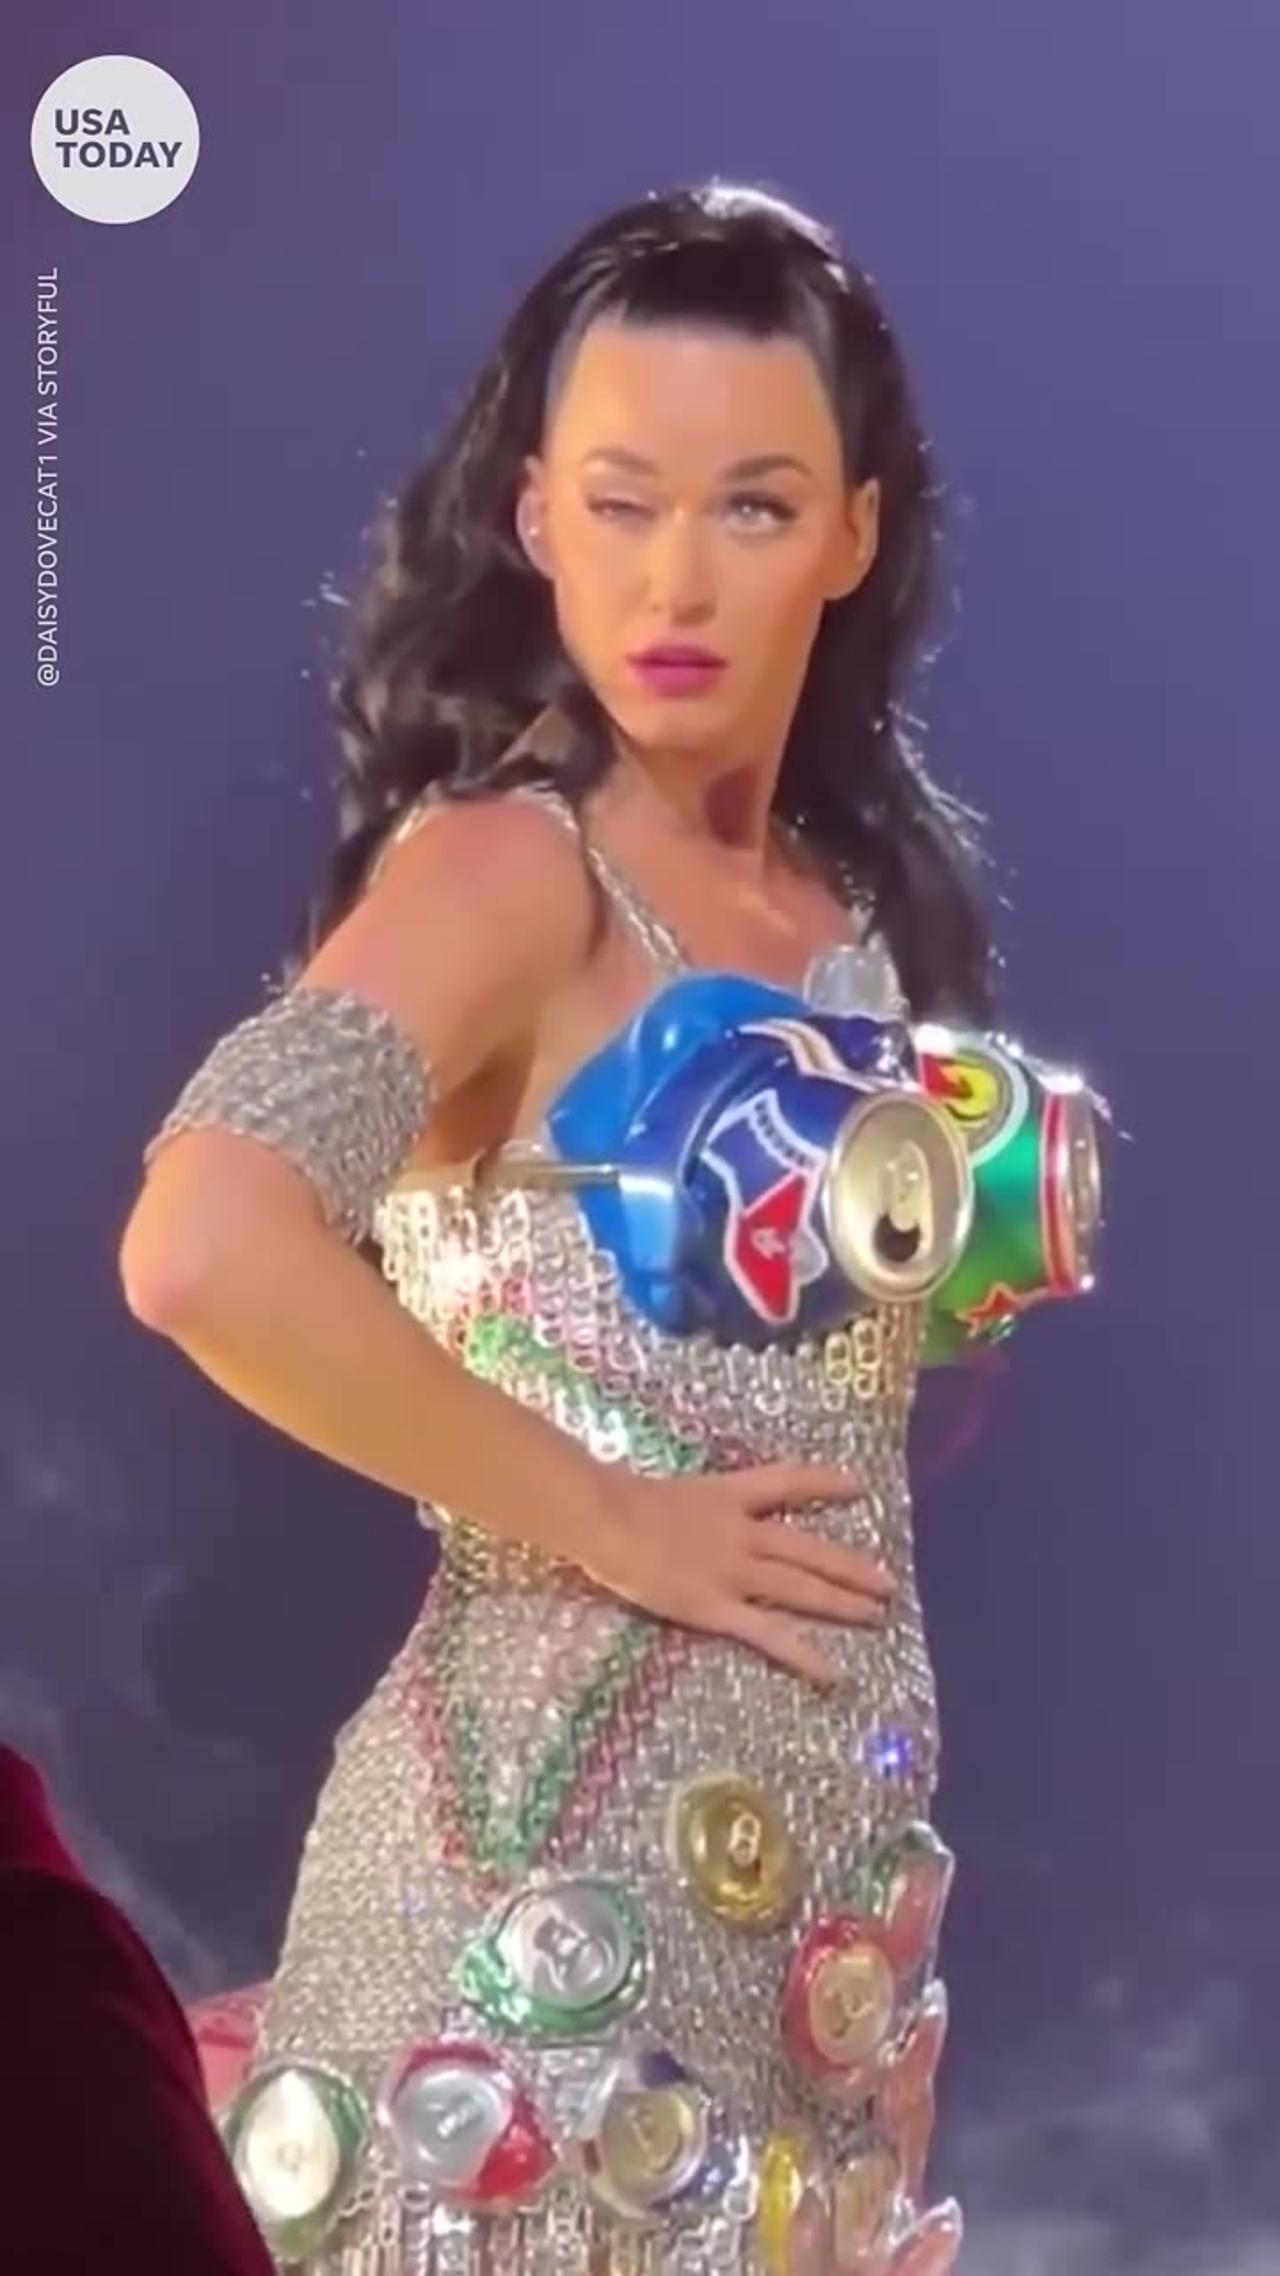 Katy Perry goes viral for mid-concert eye ‘glitch’ _ USA TODAY #Shorts